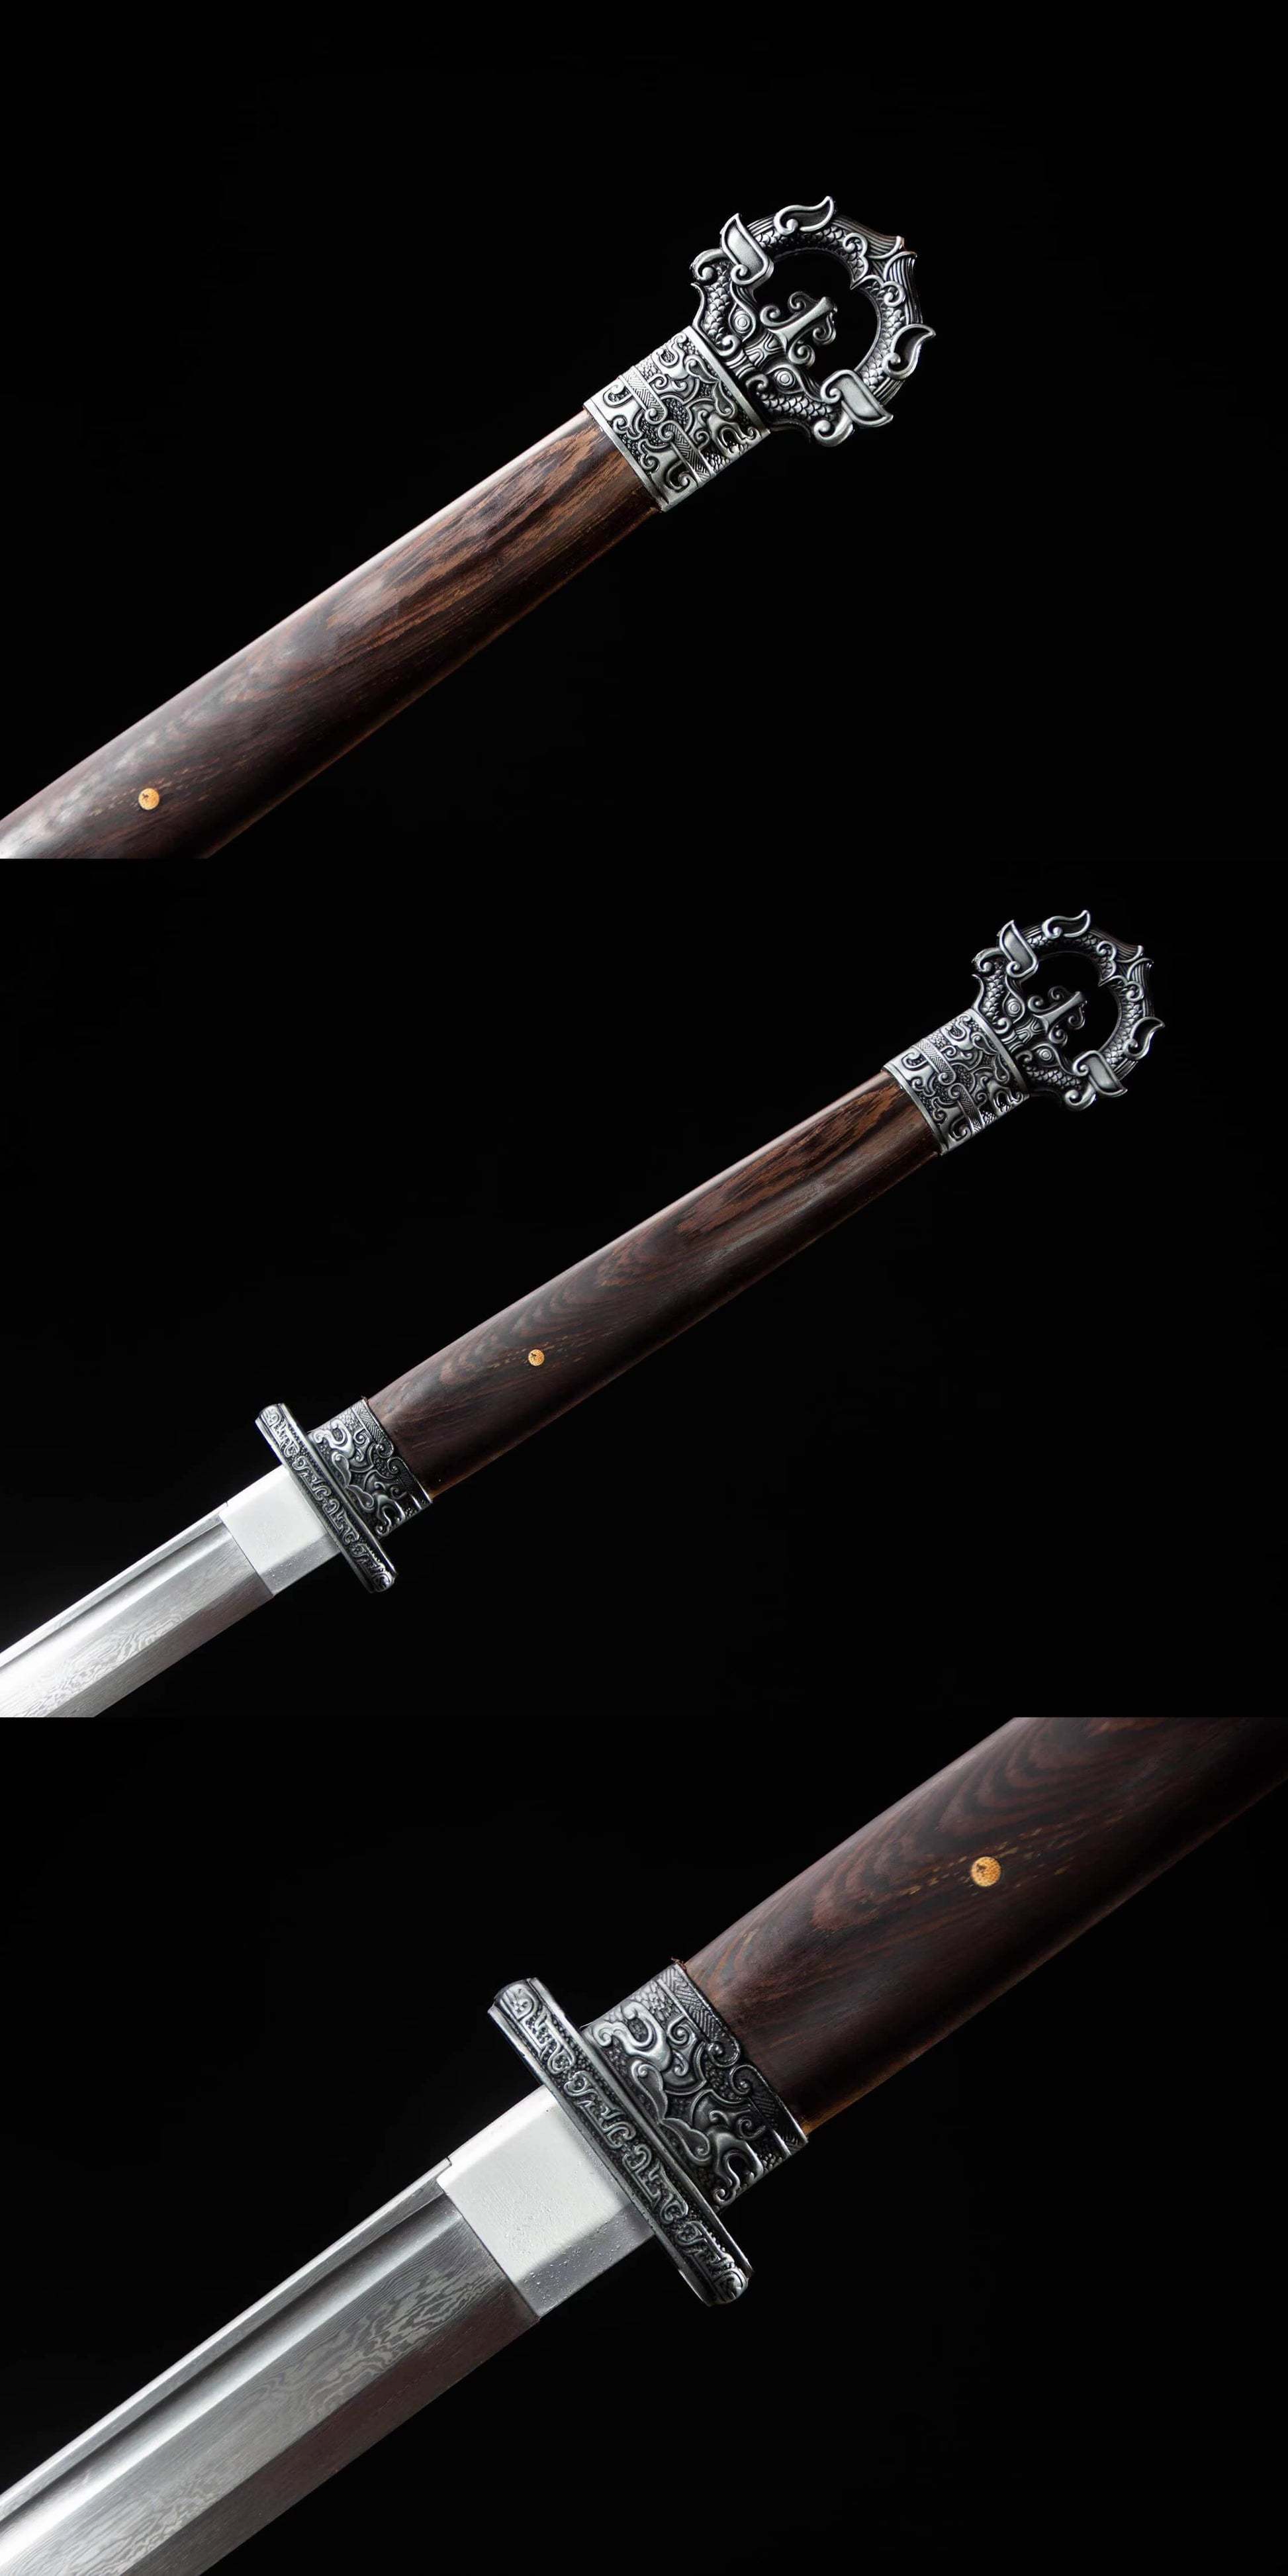 Traditional Chinese Tang dao Sword with Damascus Steel Blade and Alloy Fittings - Rosewood Scabbard